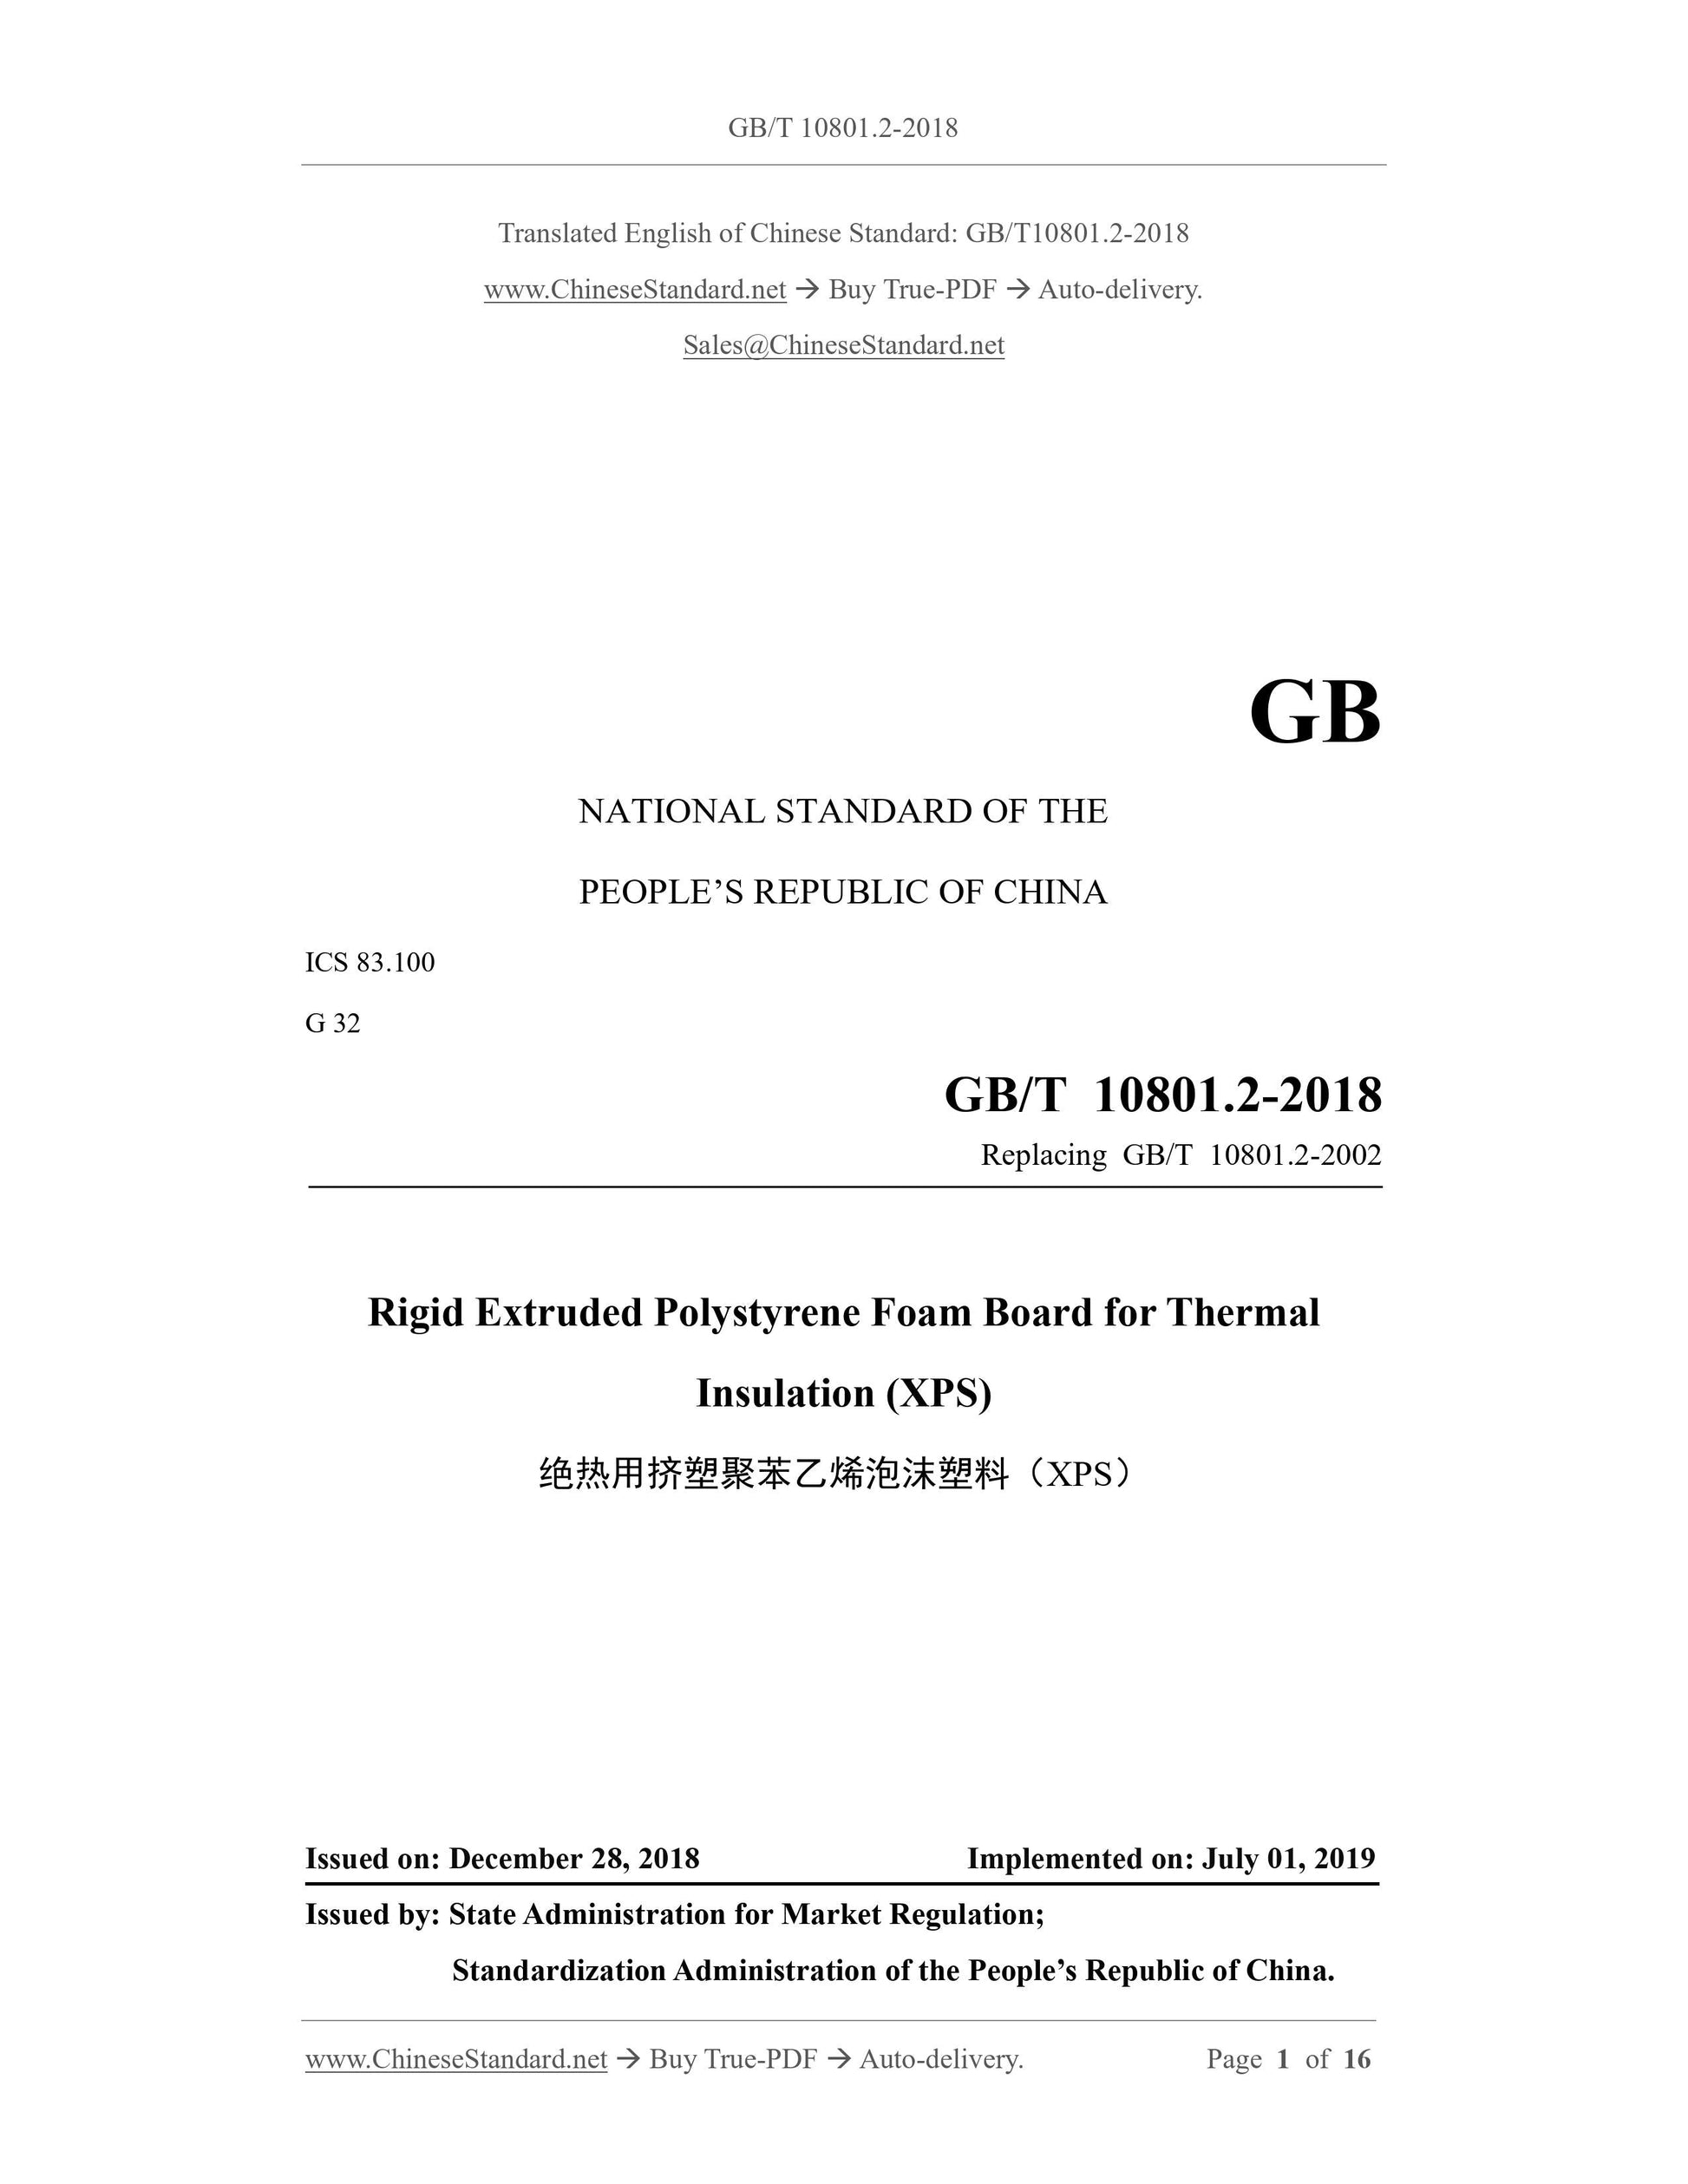 GB/T 10801.2-2018 Page 1